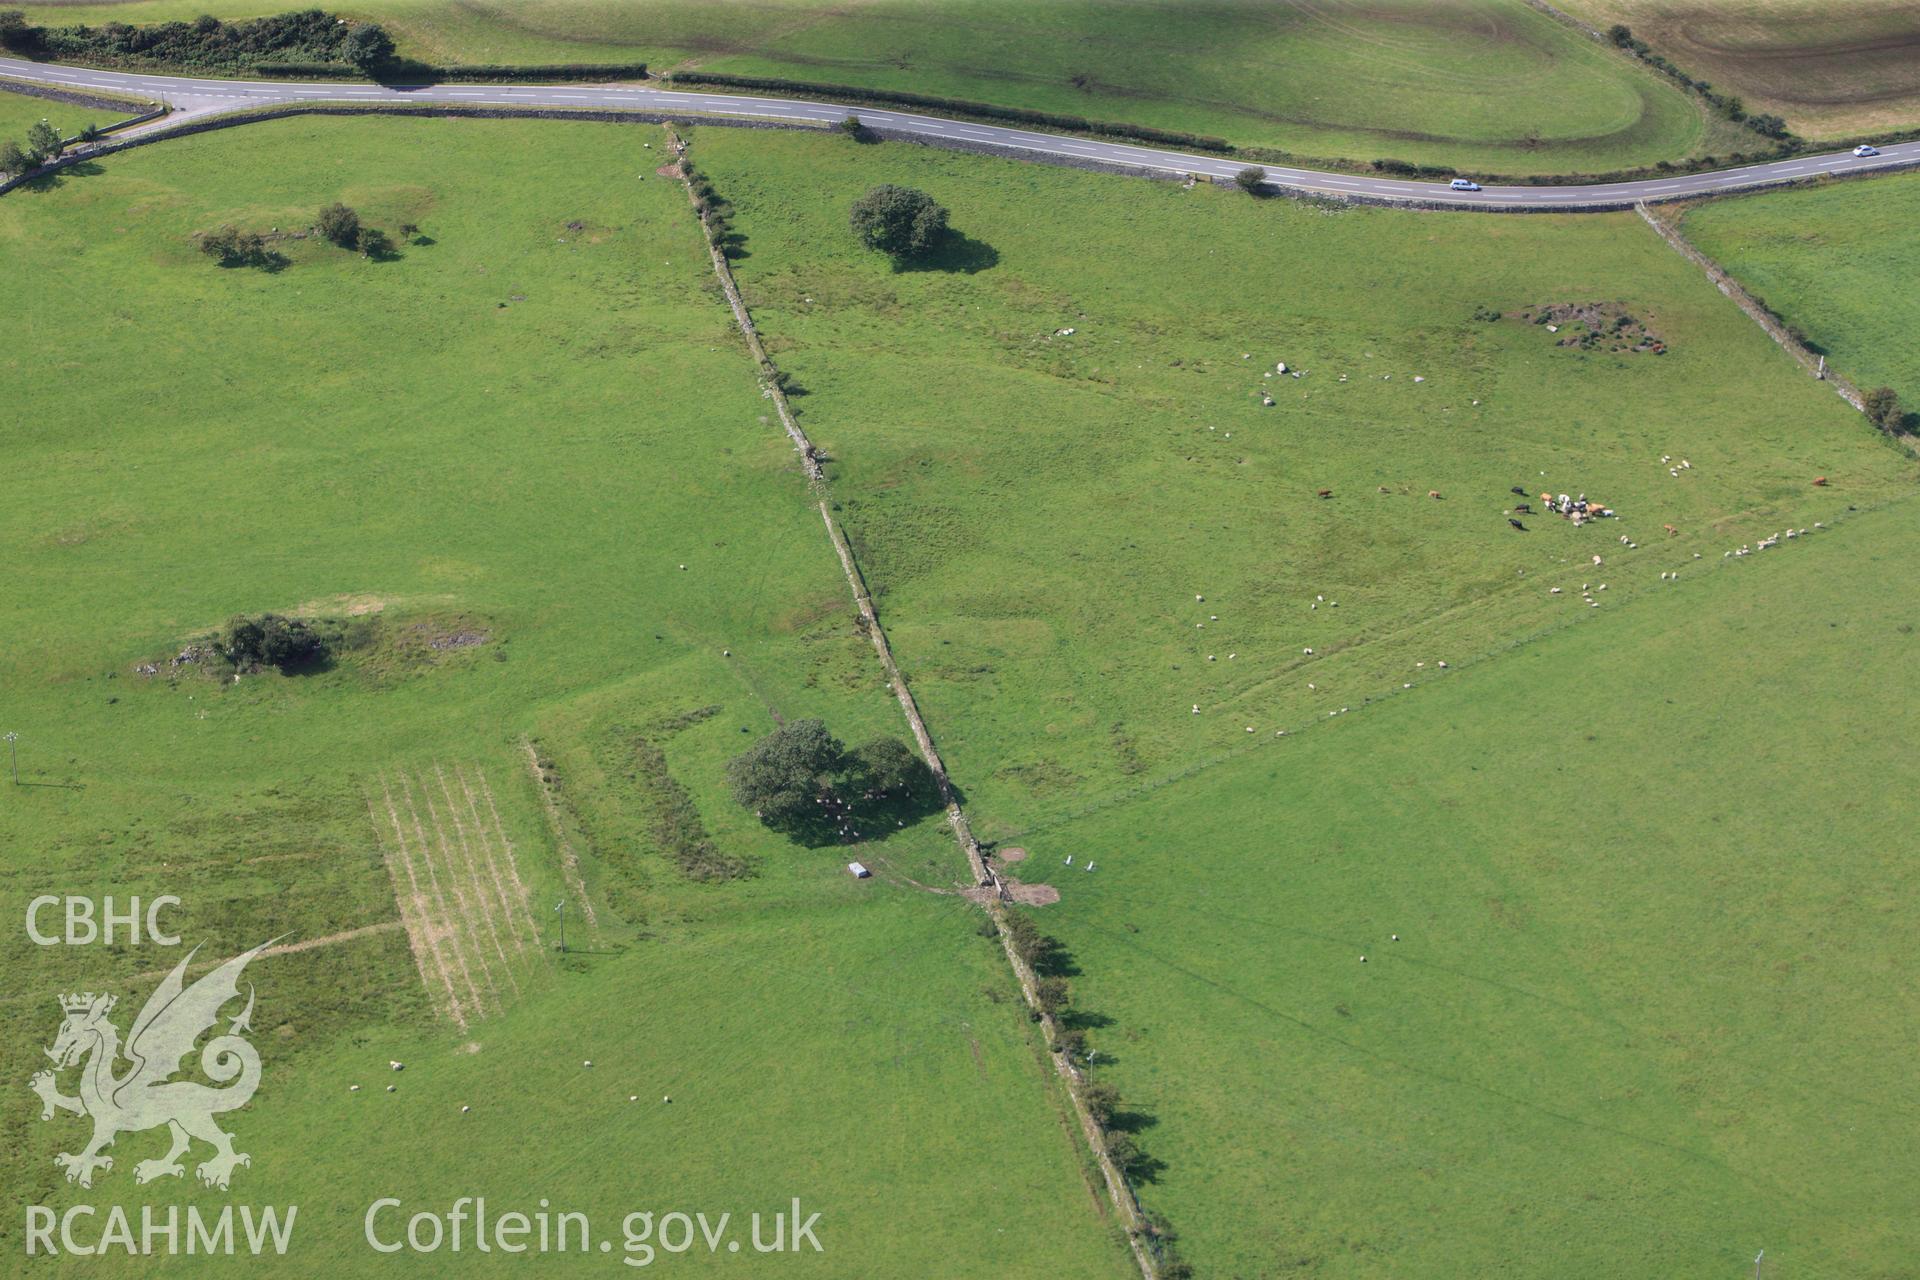 RCAHMW colour oblique photograph of Coed Ty Mawr moated site. Taken by Toby Driver on 20/07/2011.